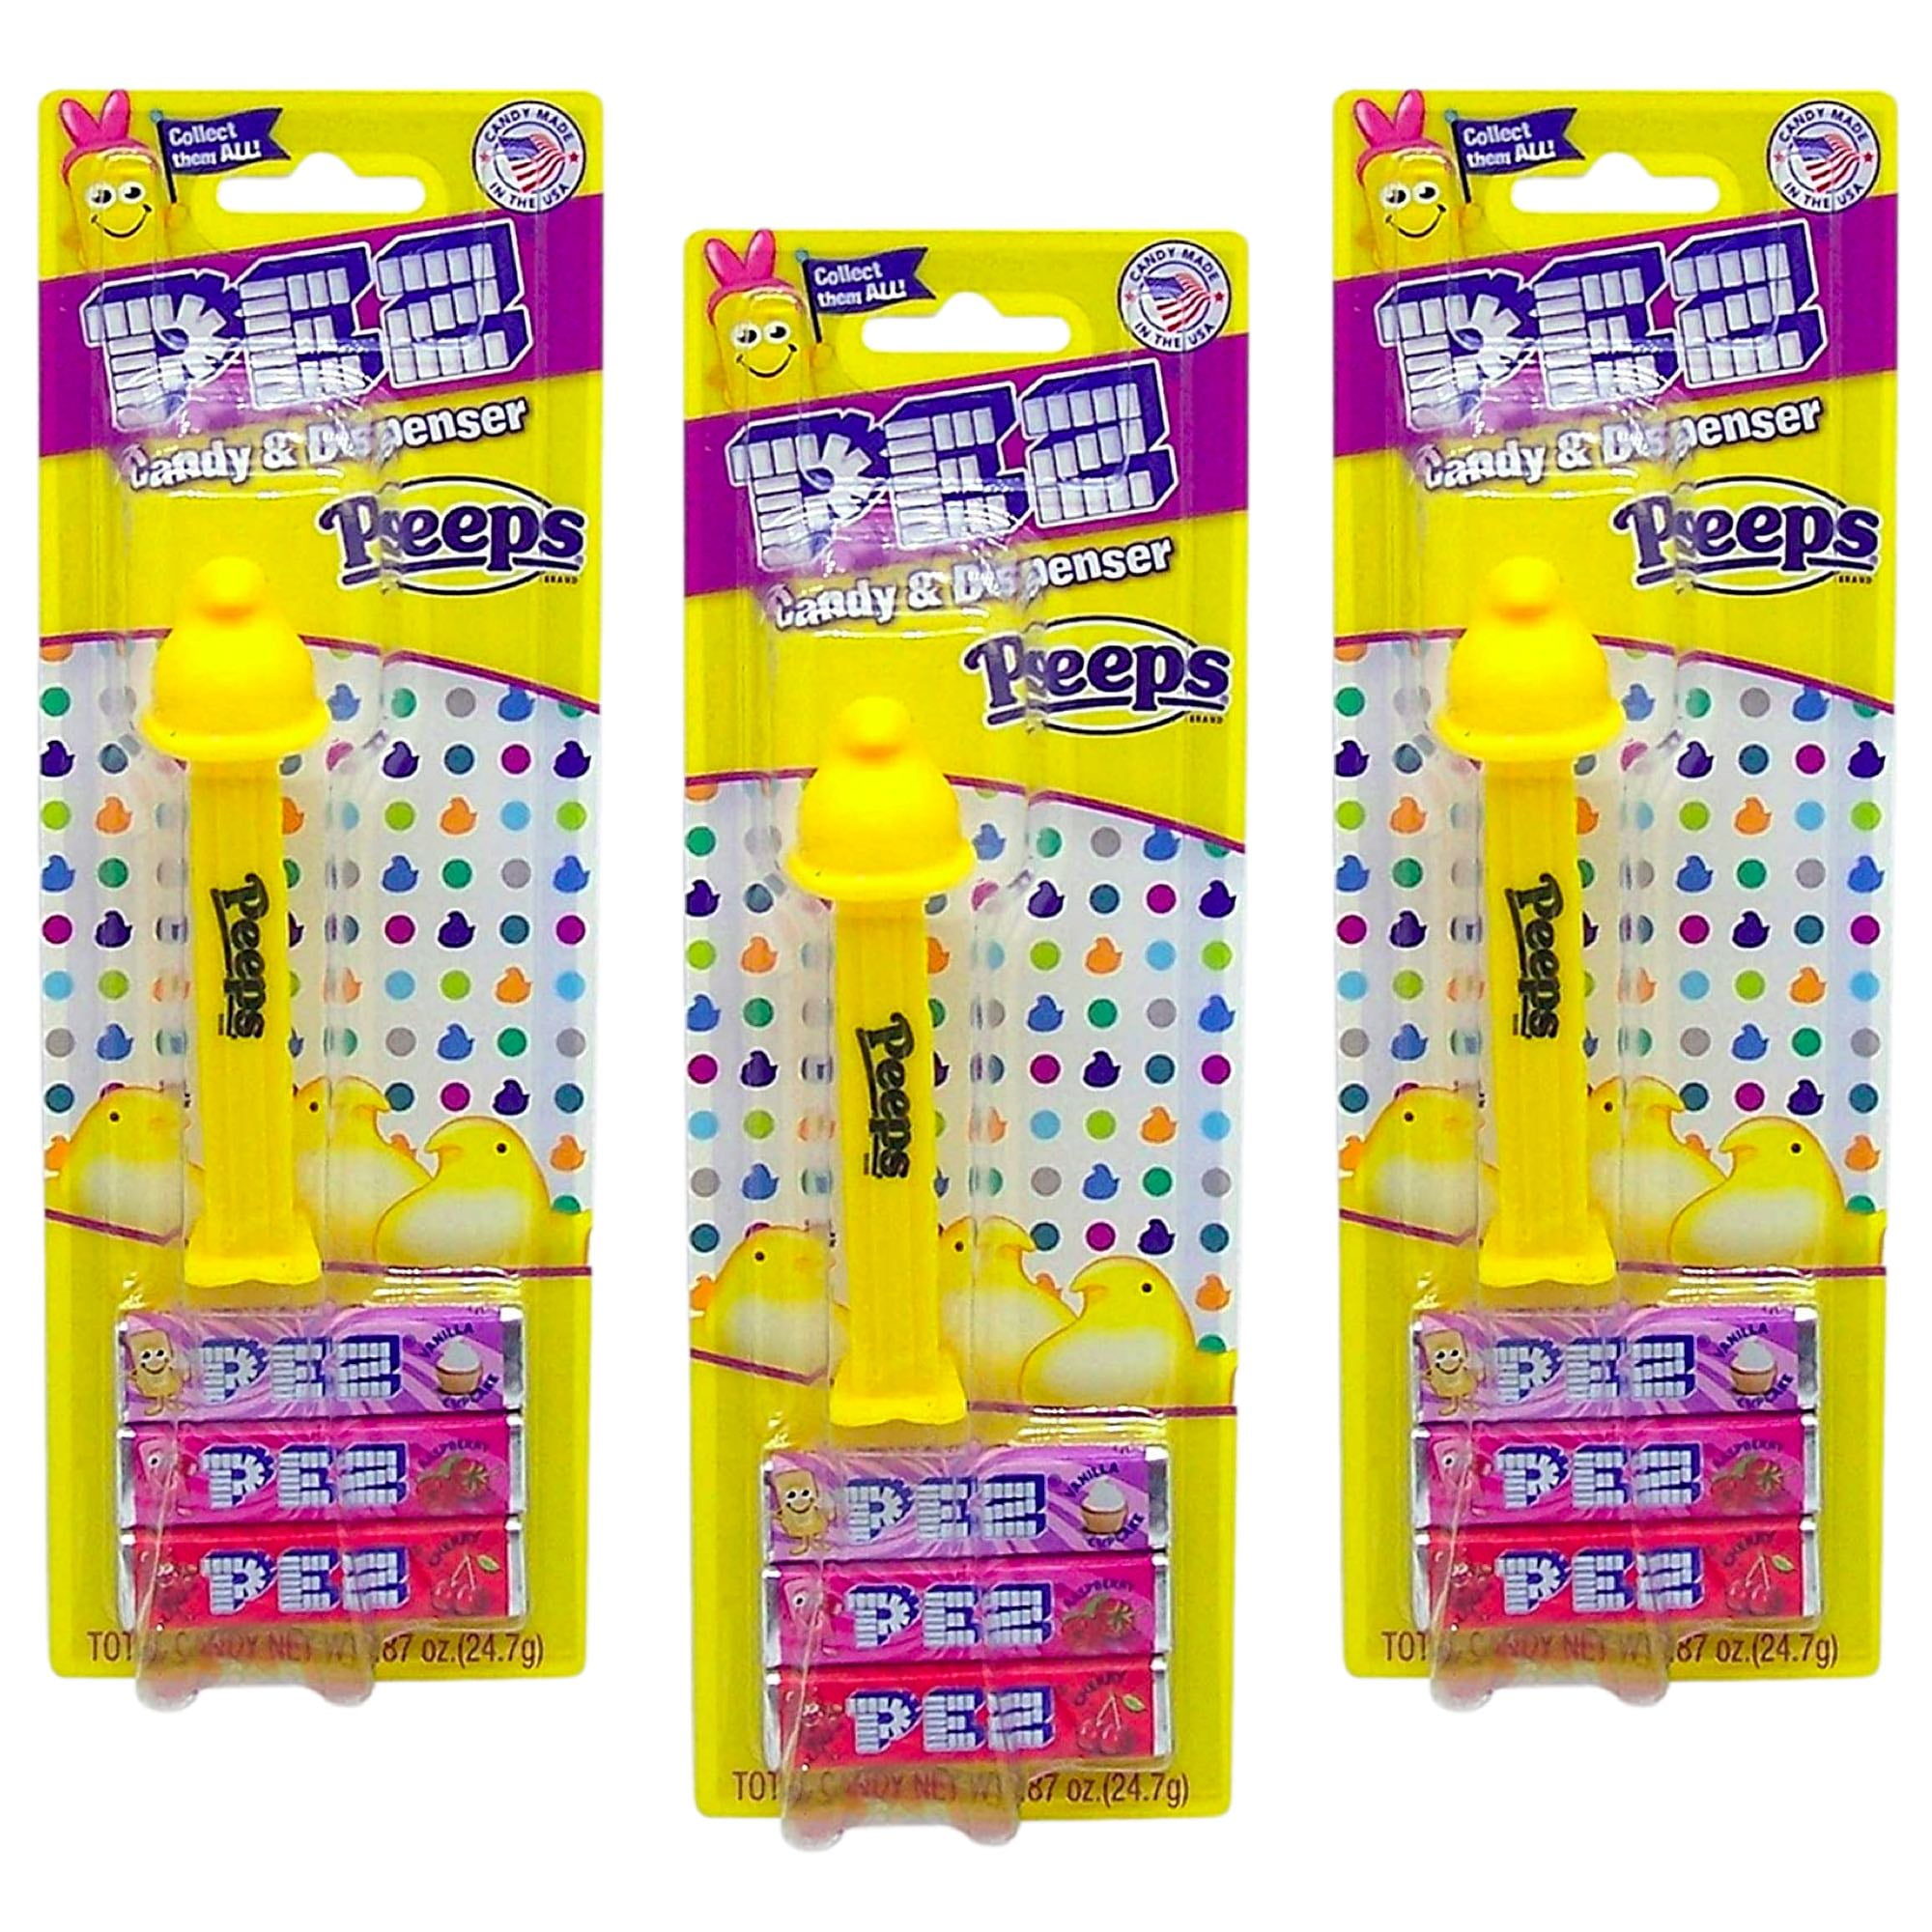 Pink & Yellow Pez Candy & Dispensers Peeps 4 Rolls Of Candy & 2 Containers 